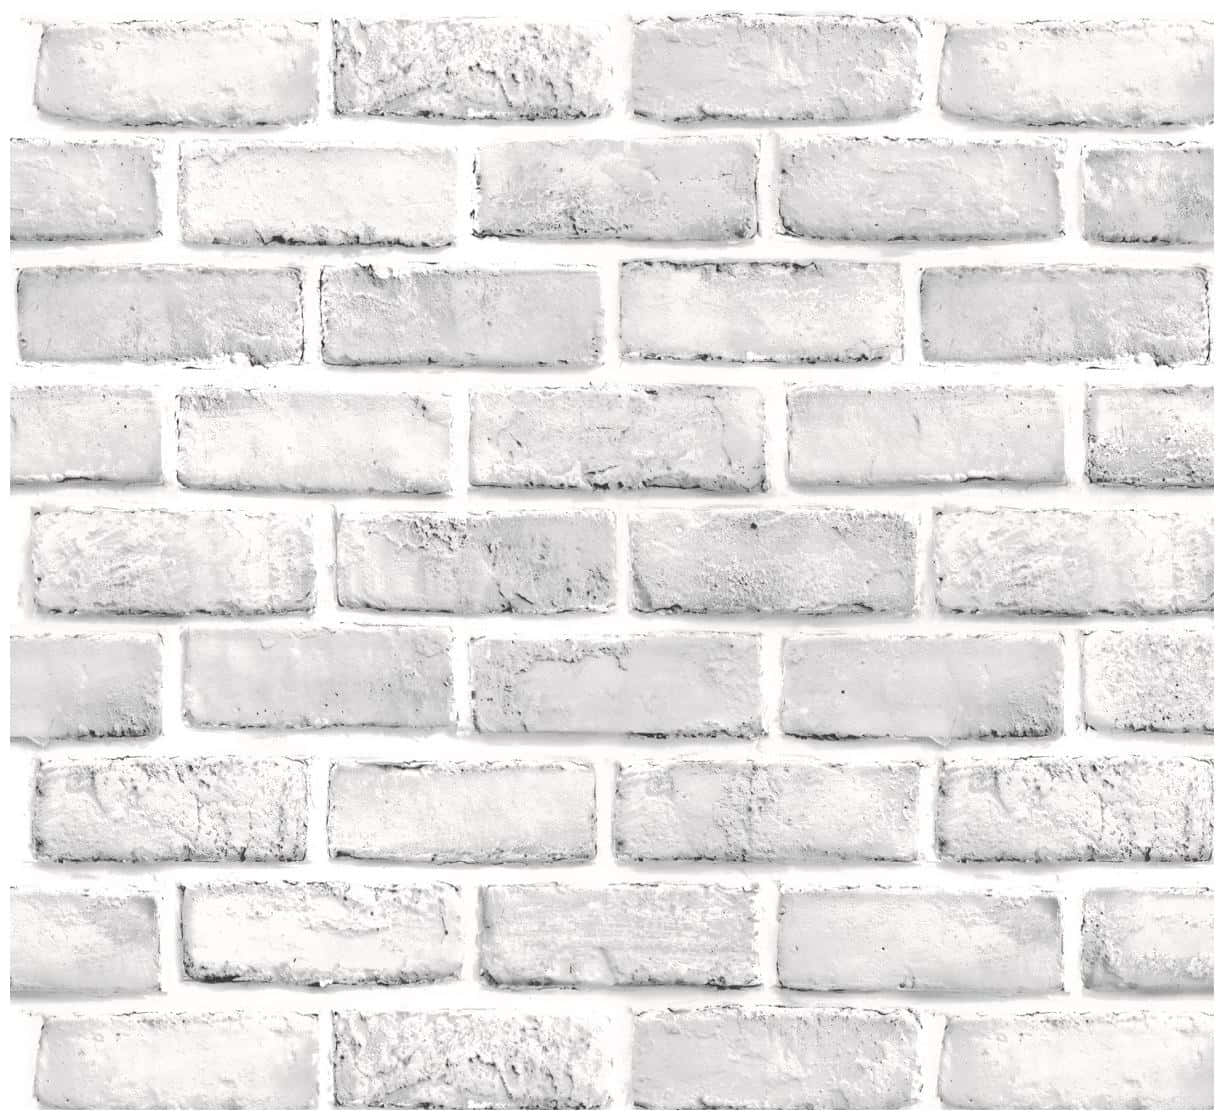 [200+] White Brick Pictures | Wallpapers.com